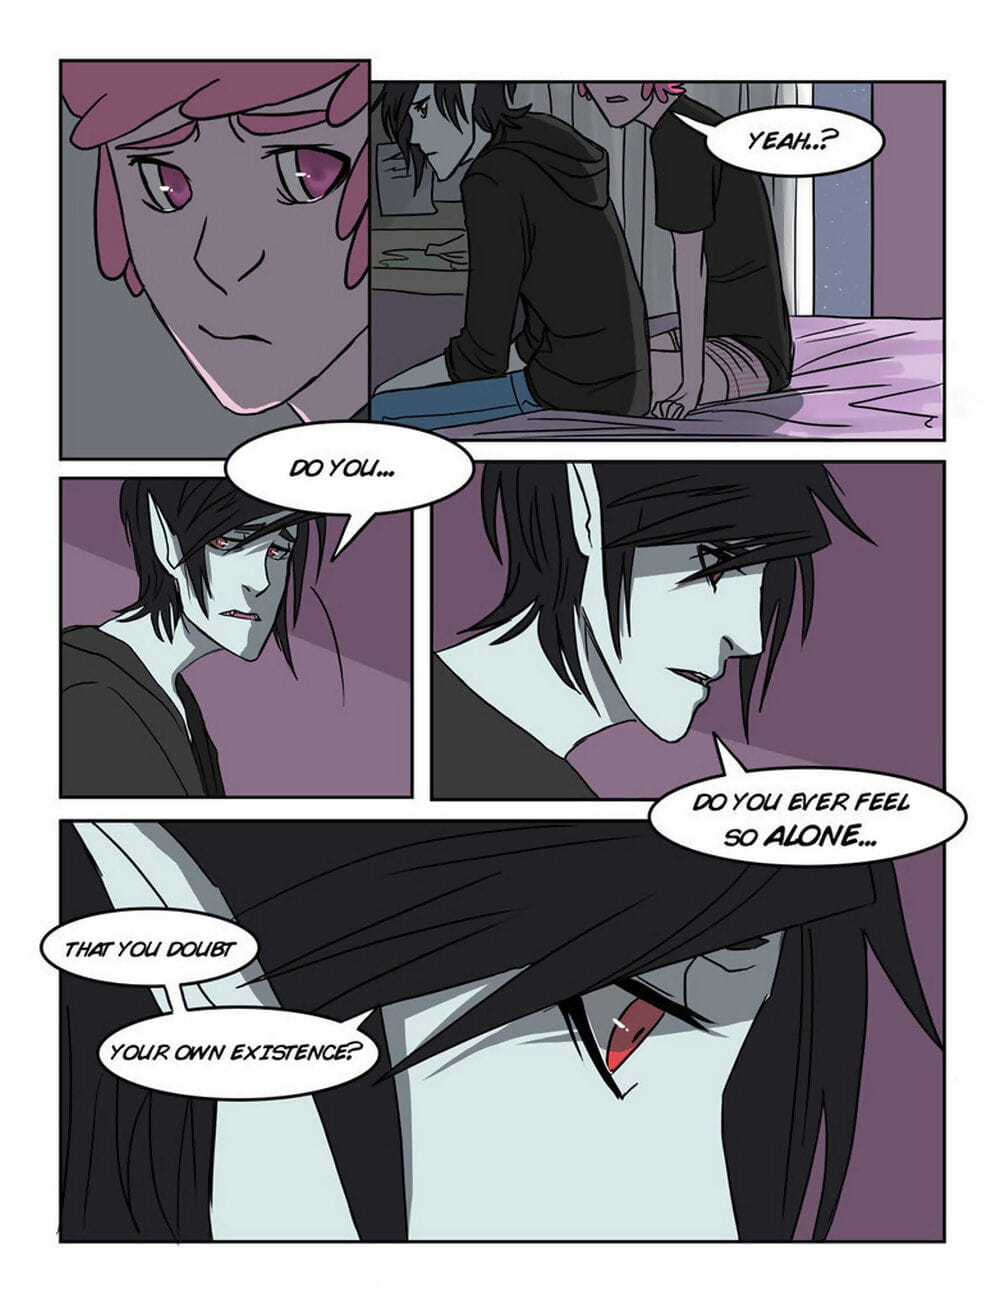 Just Your Problem 1 - part 2 page 1